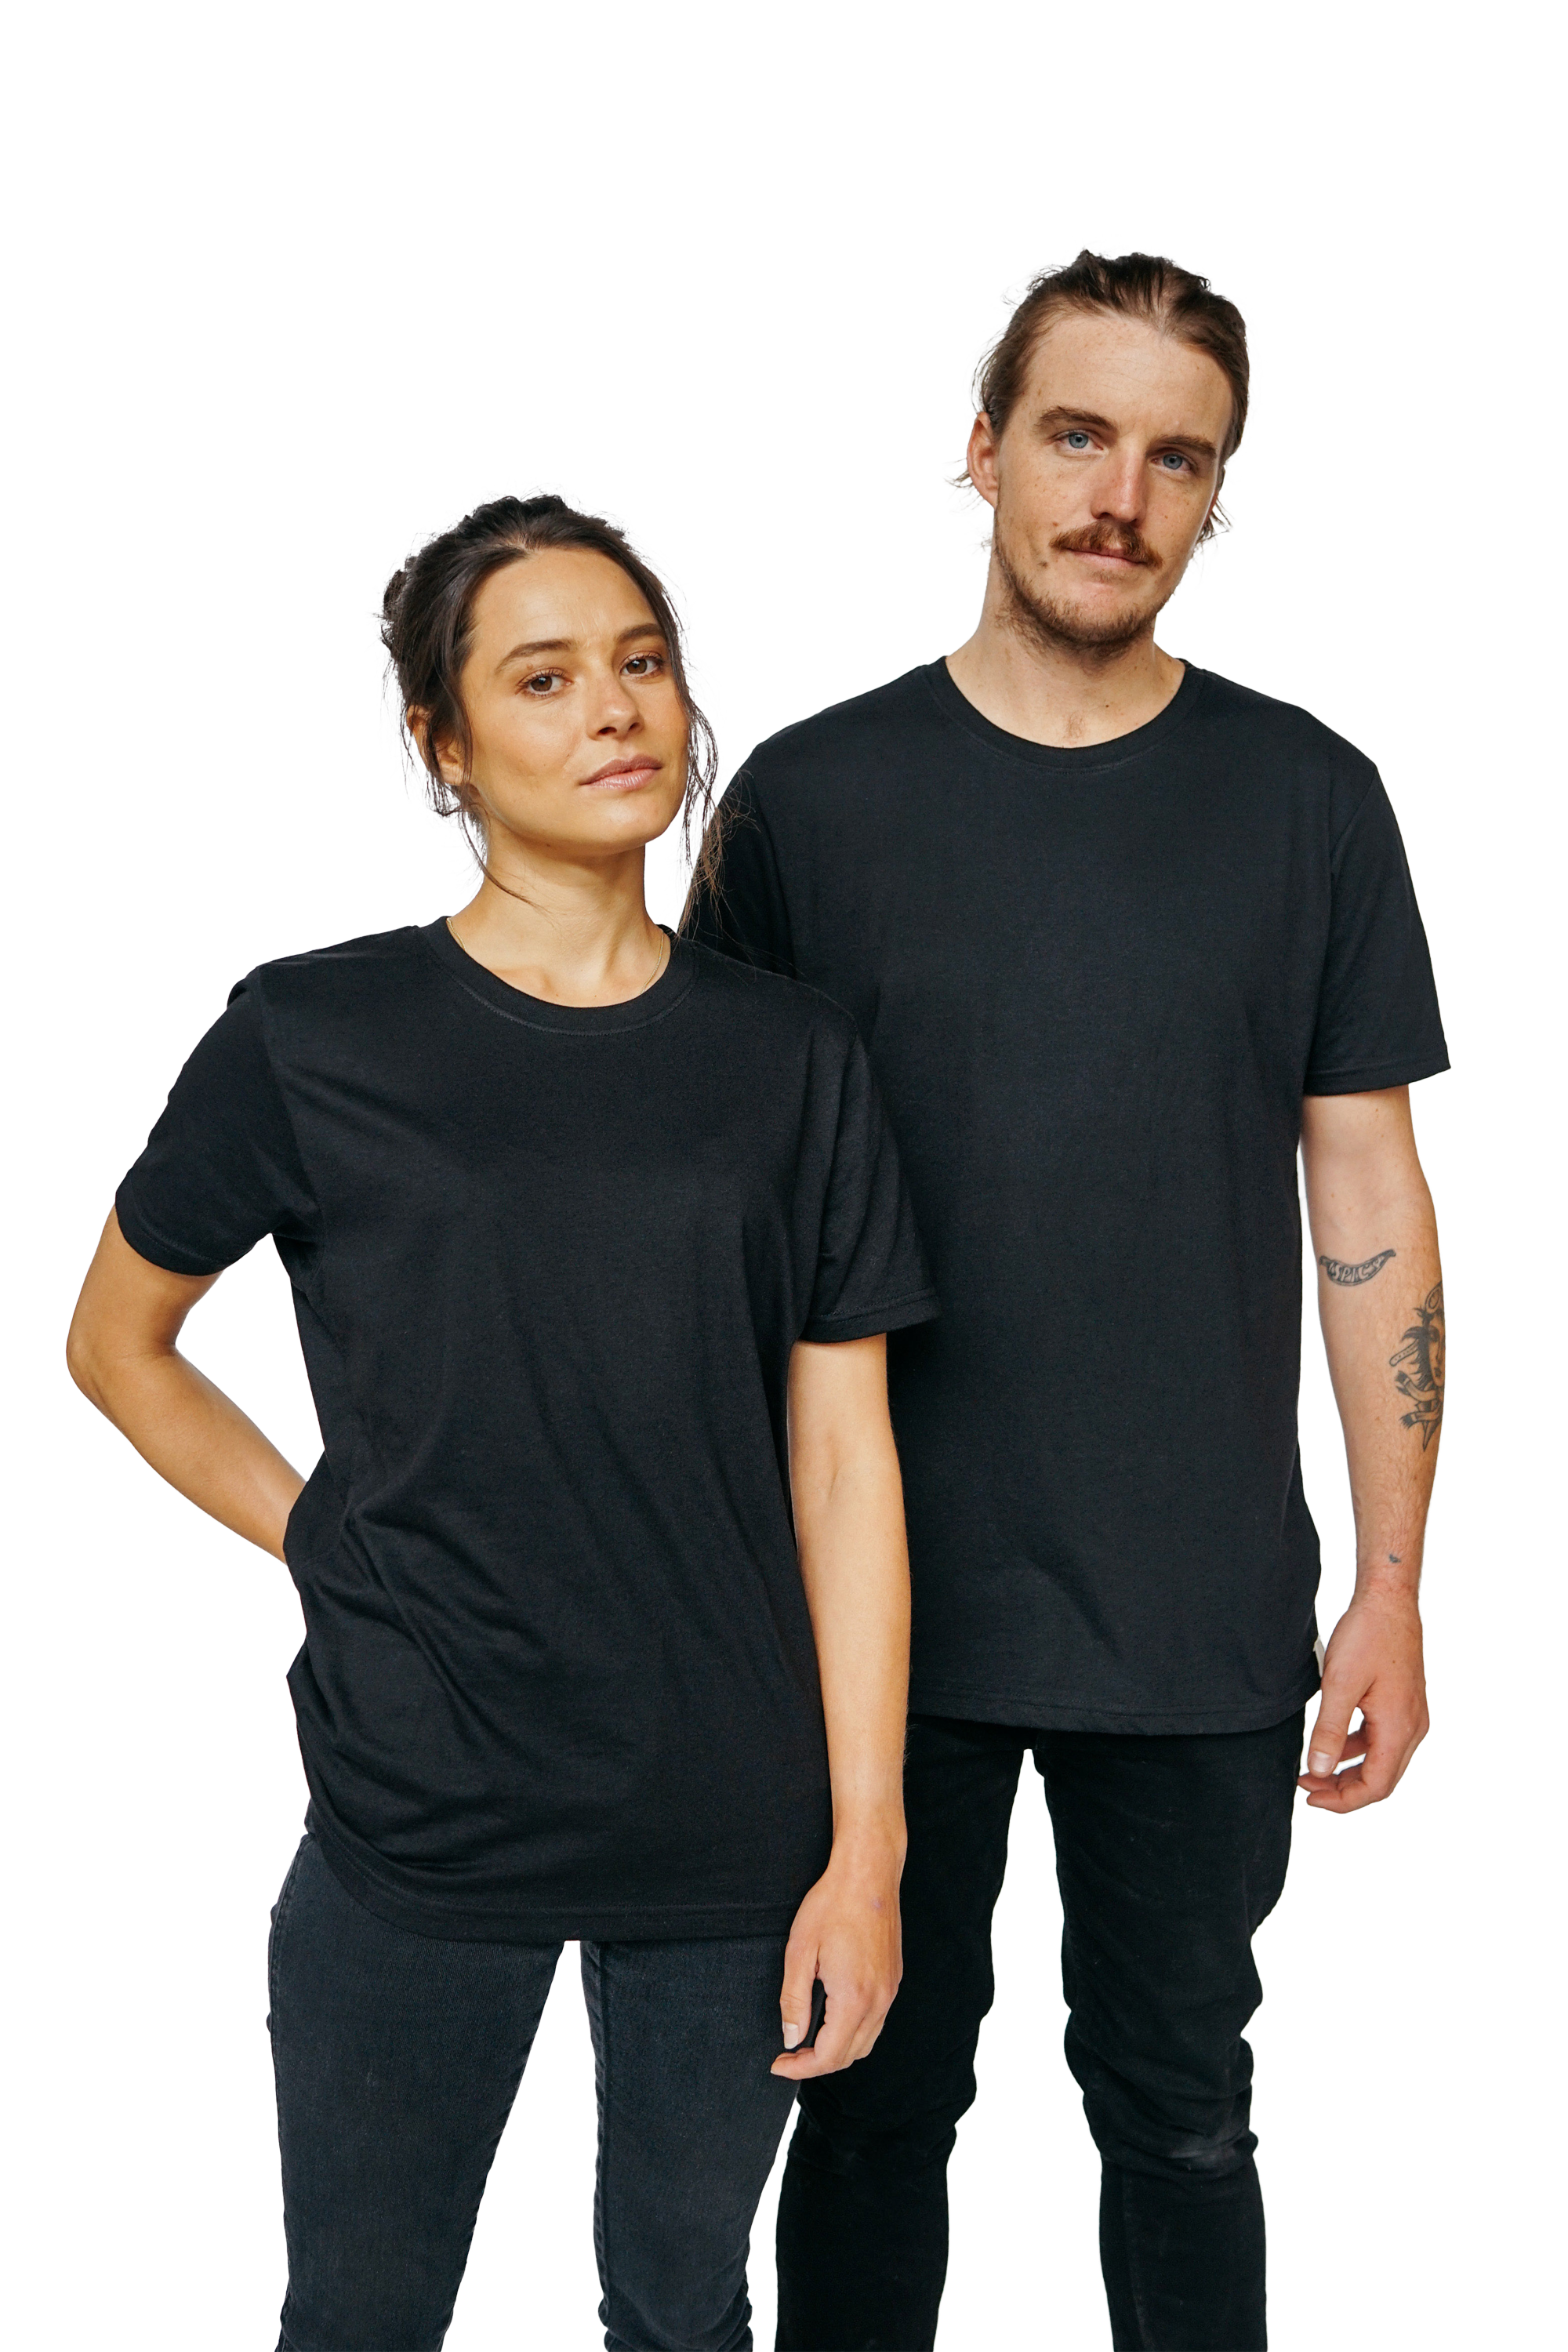 XWASTED man and women wearing pure black organic 100% recycled t-shirt 